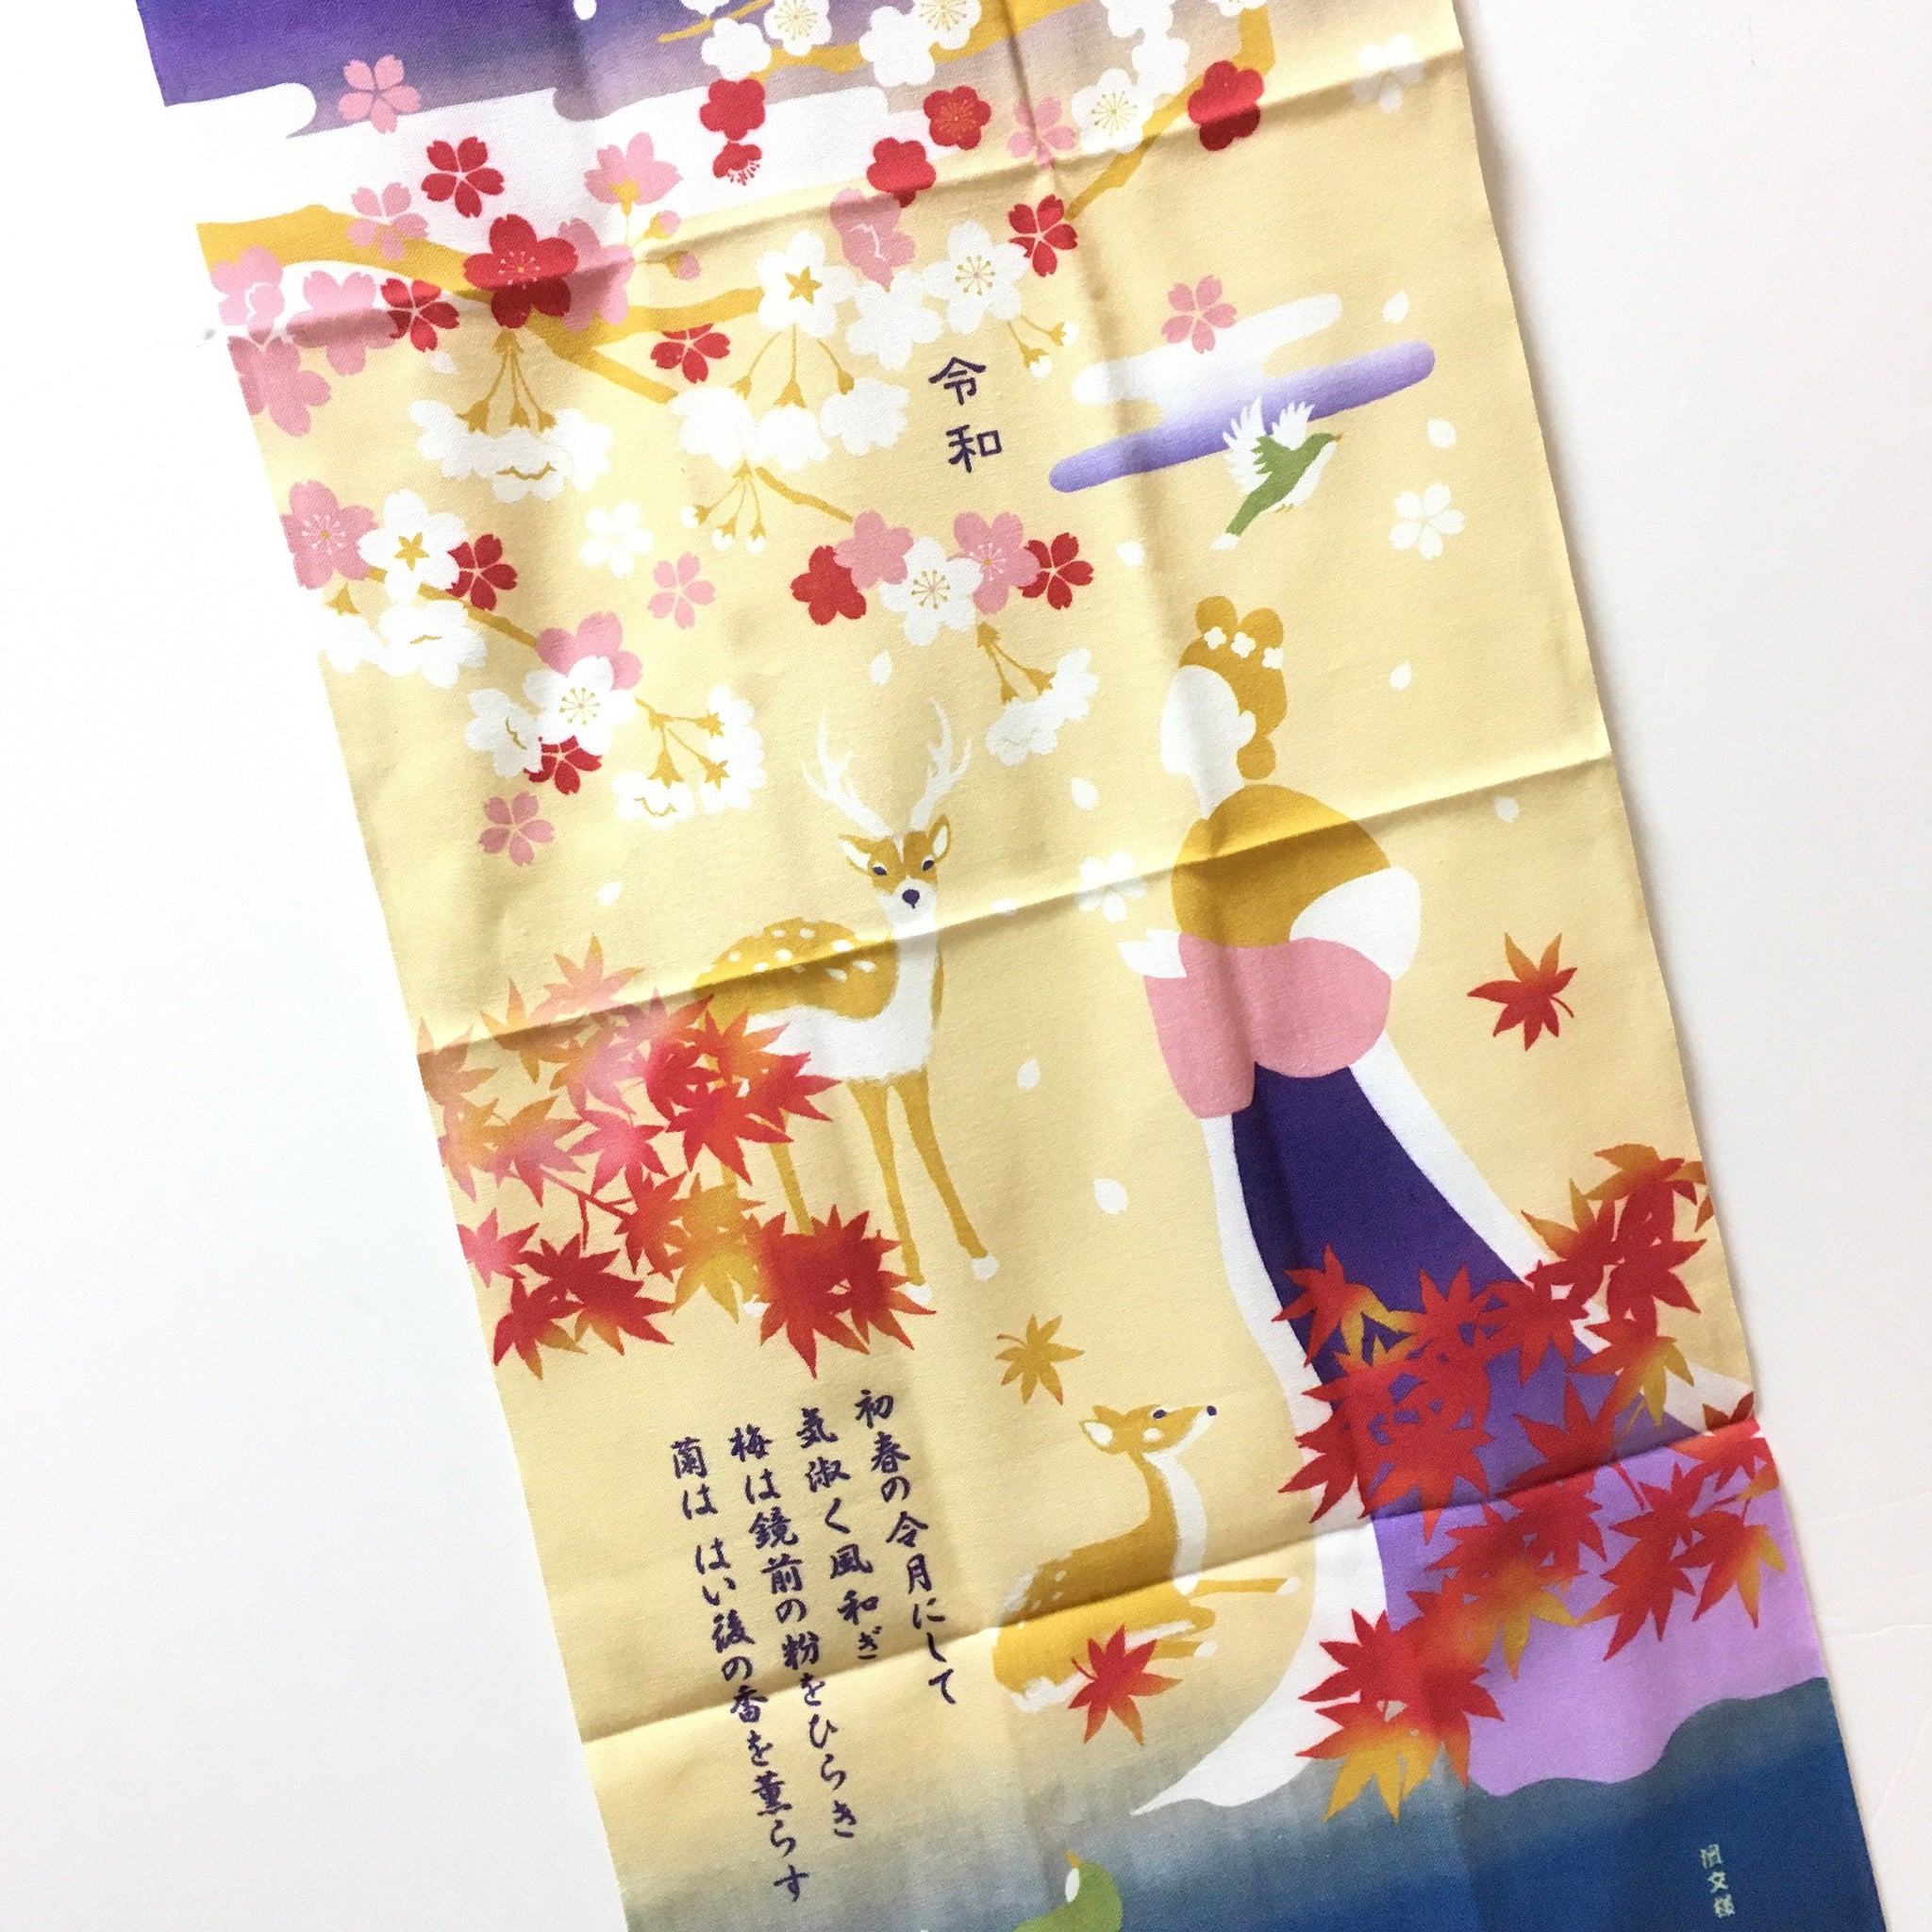 Small Japanese Hand Towels Add Festive Touch to Gifts - The Japan News